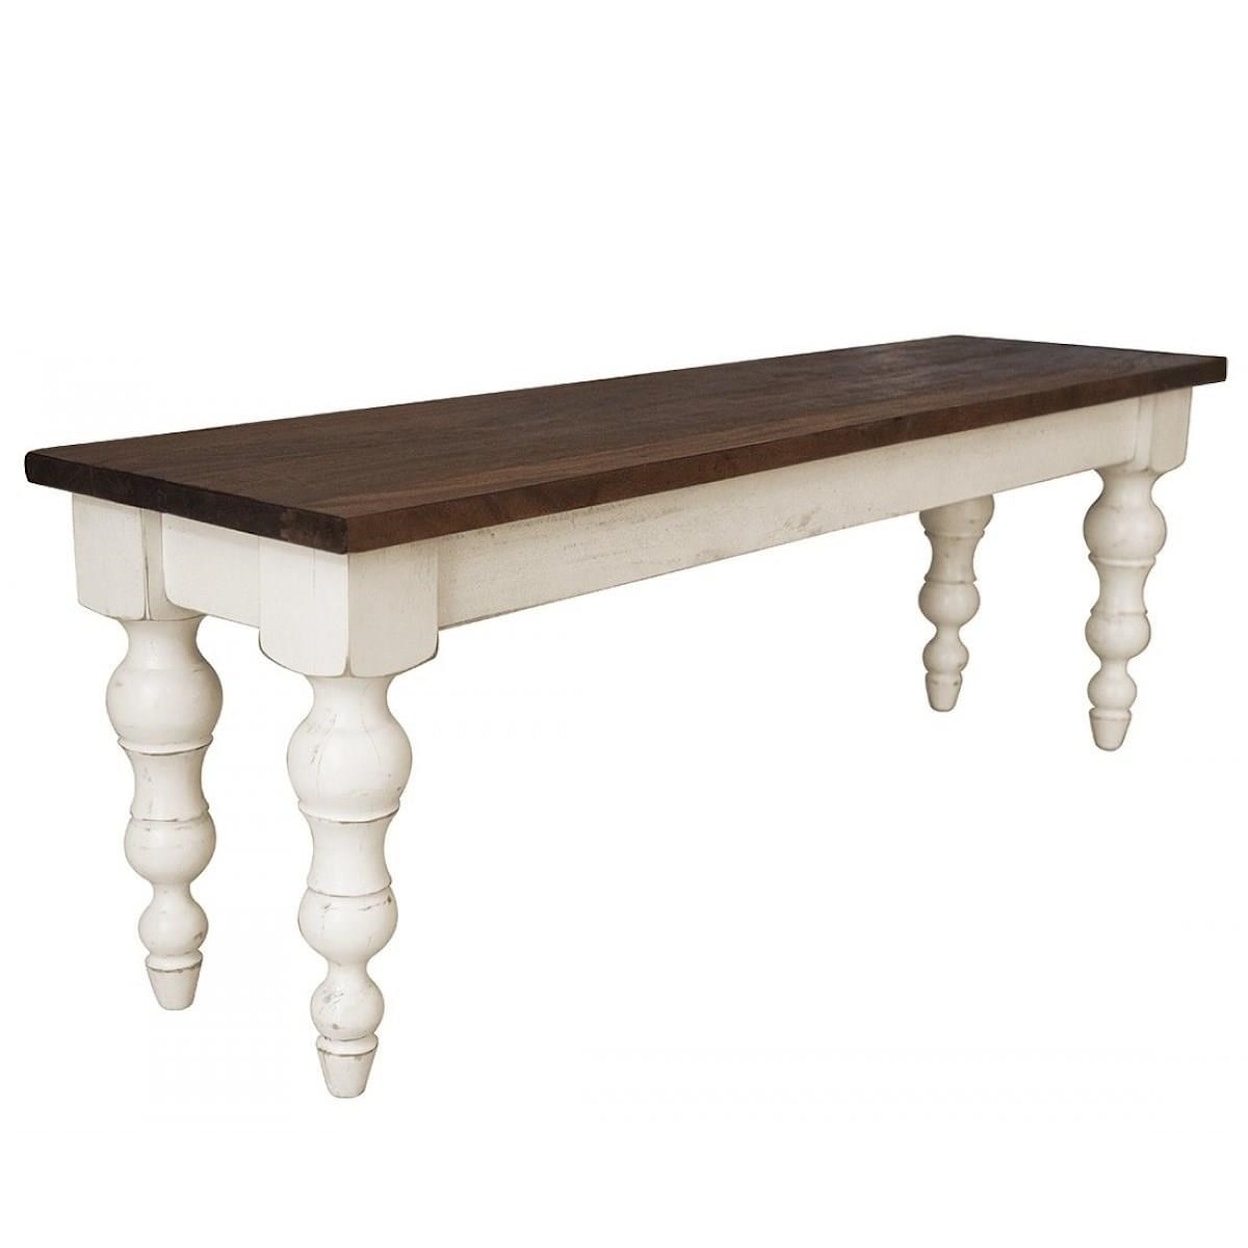 IFD International Furniture Direct Rock Valley Dining Bench with Turned Legs